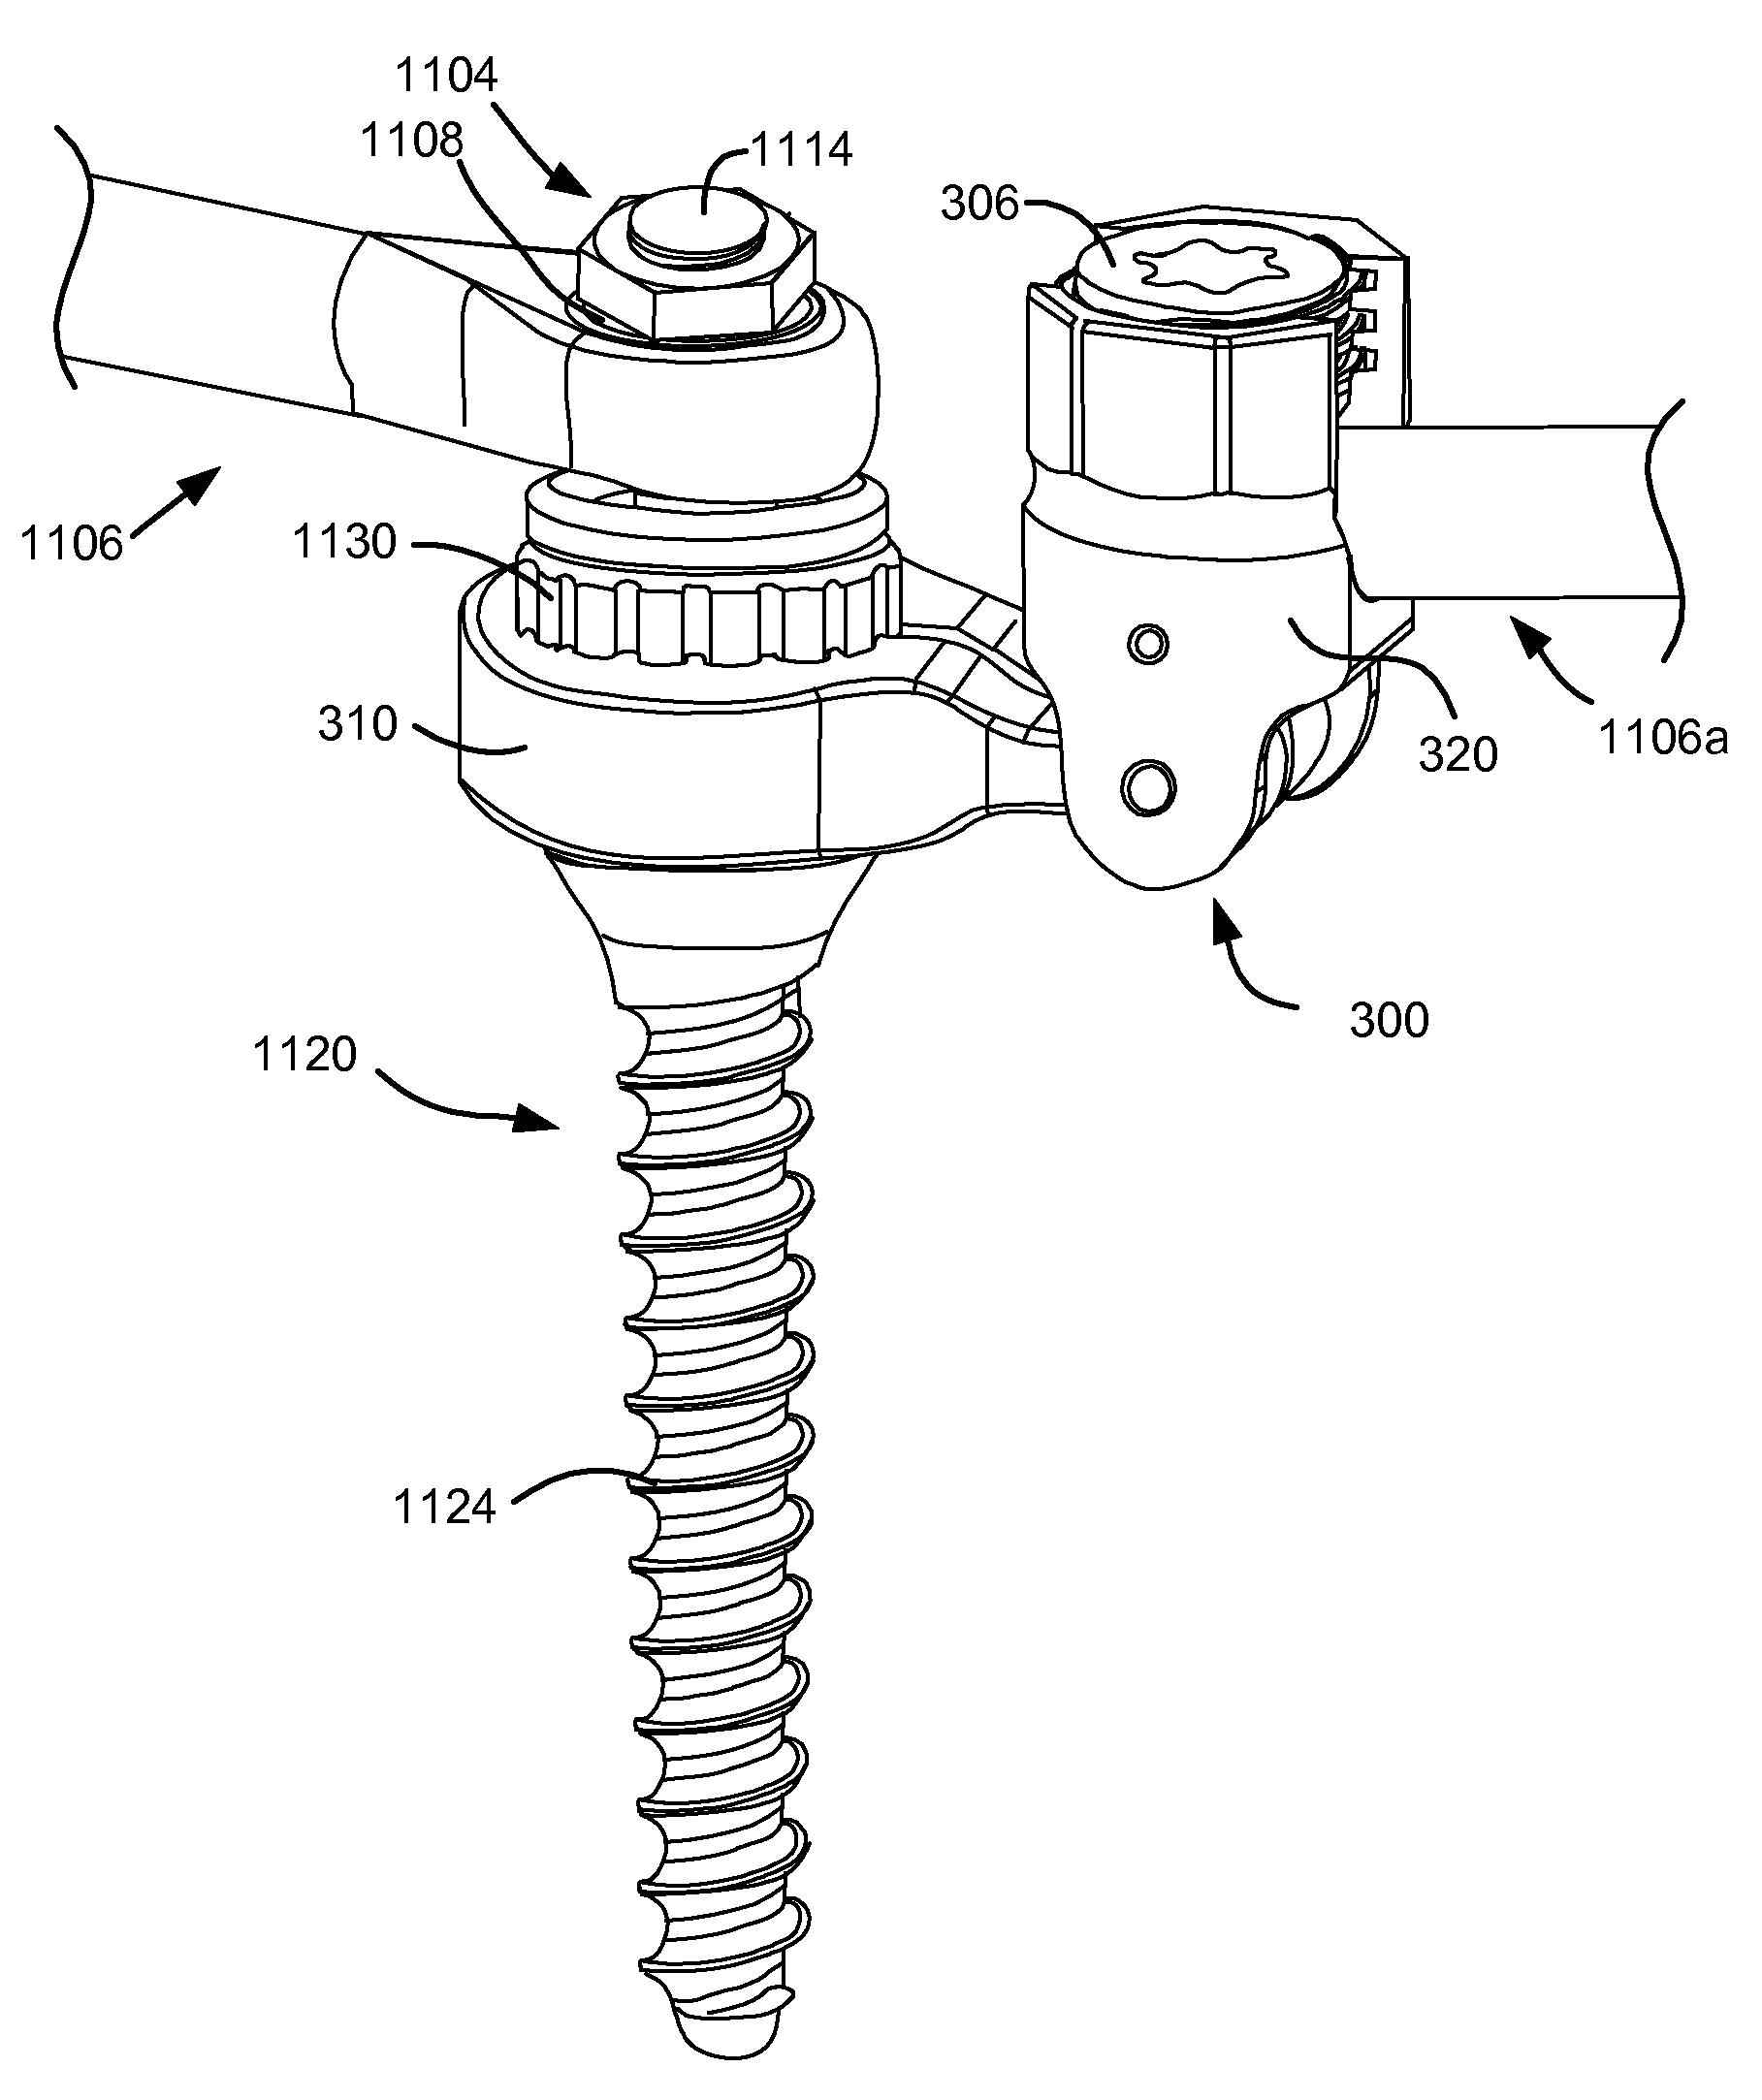 Versatile polyaxial connector assembly and method for dynamic stabilization of the spine